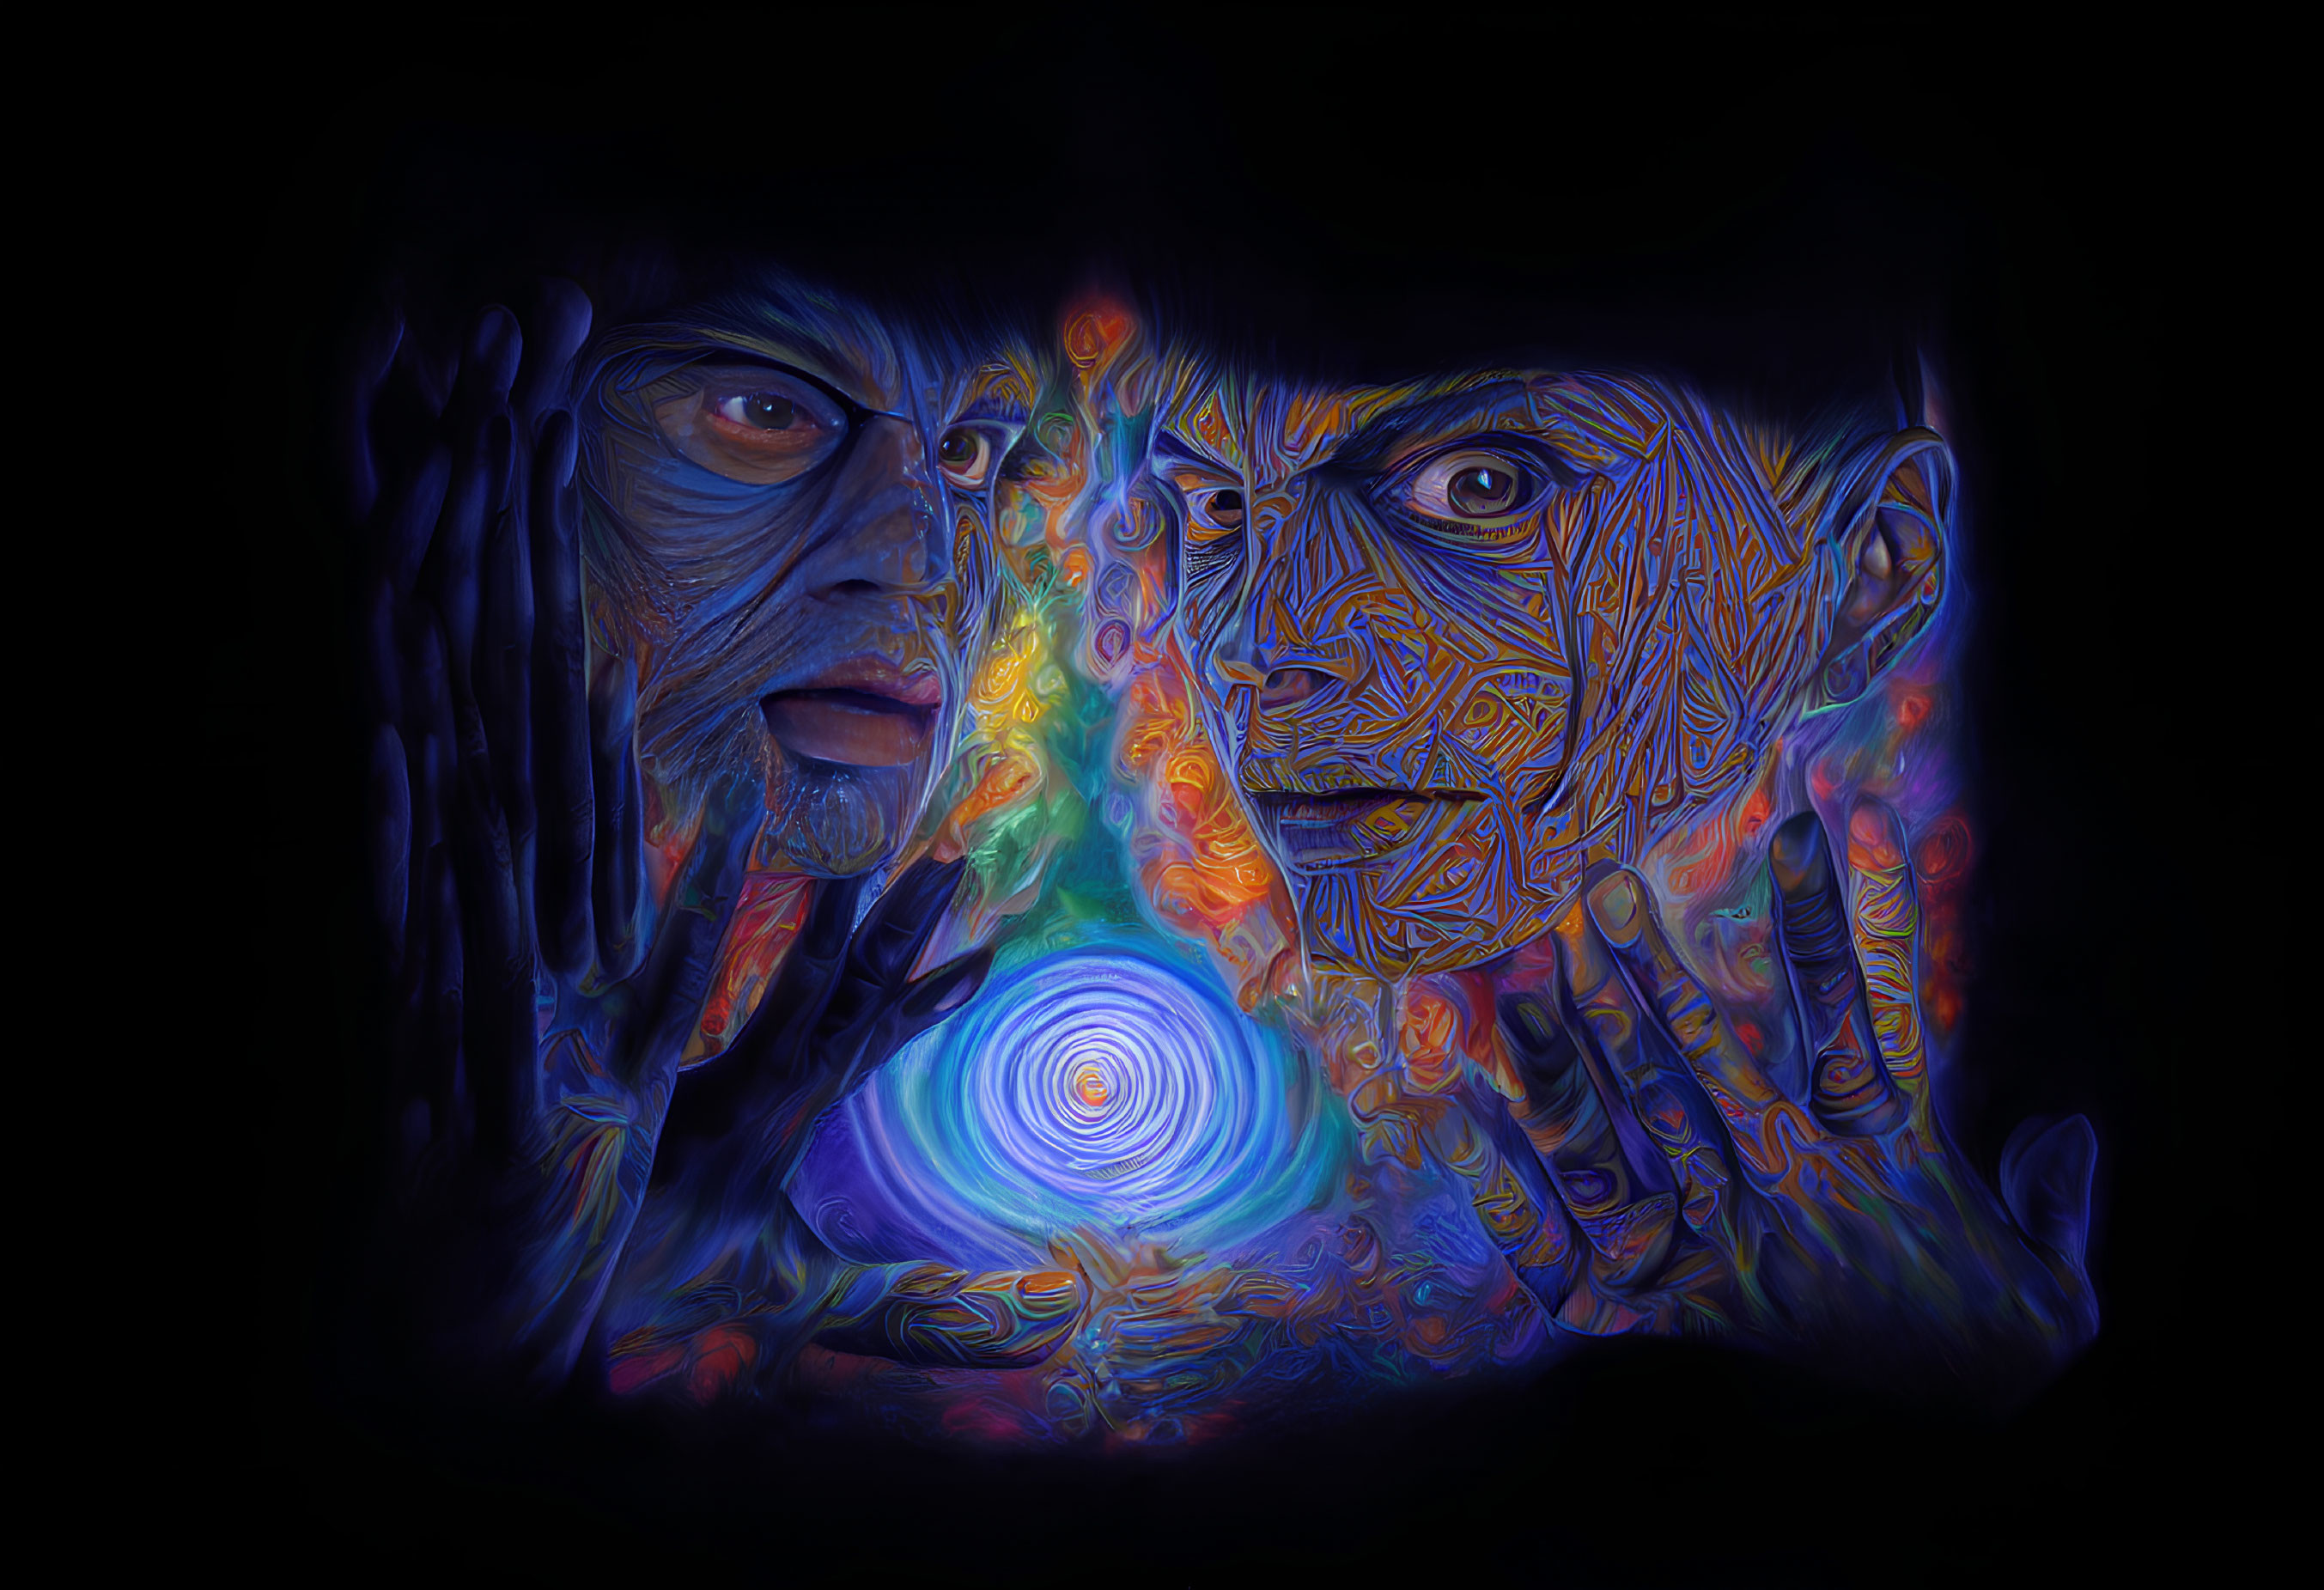 Colorful digital artwork: Two distorted faces with swirling patterns and hands on dark background